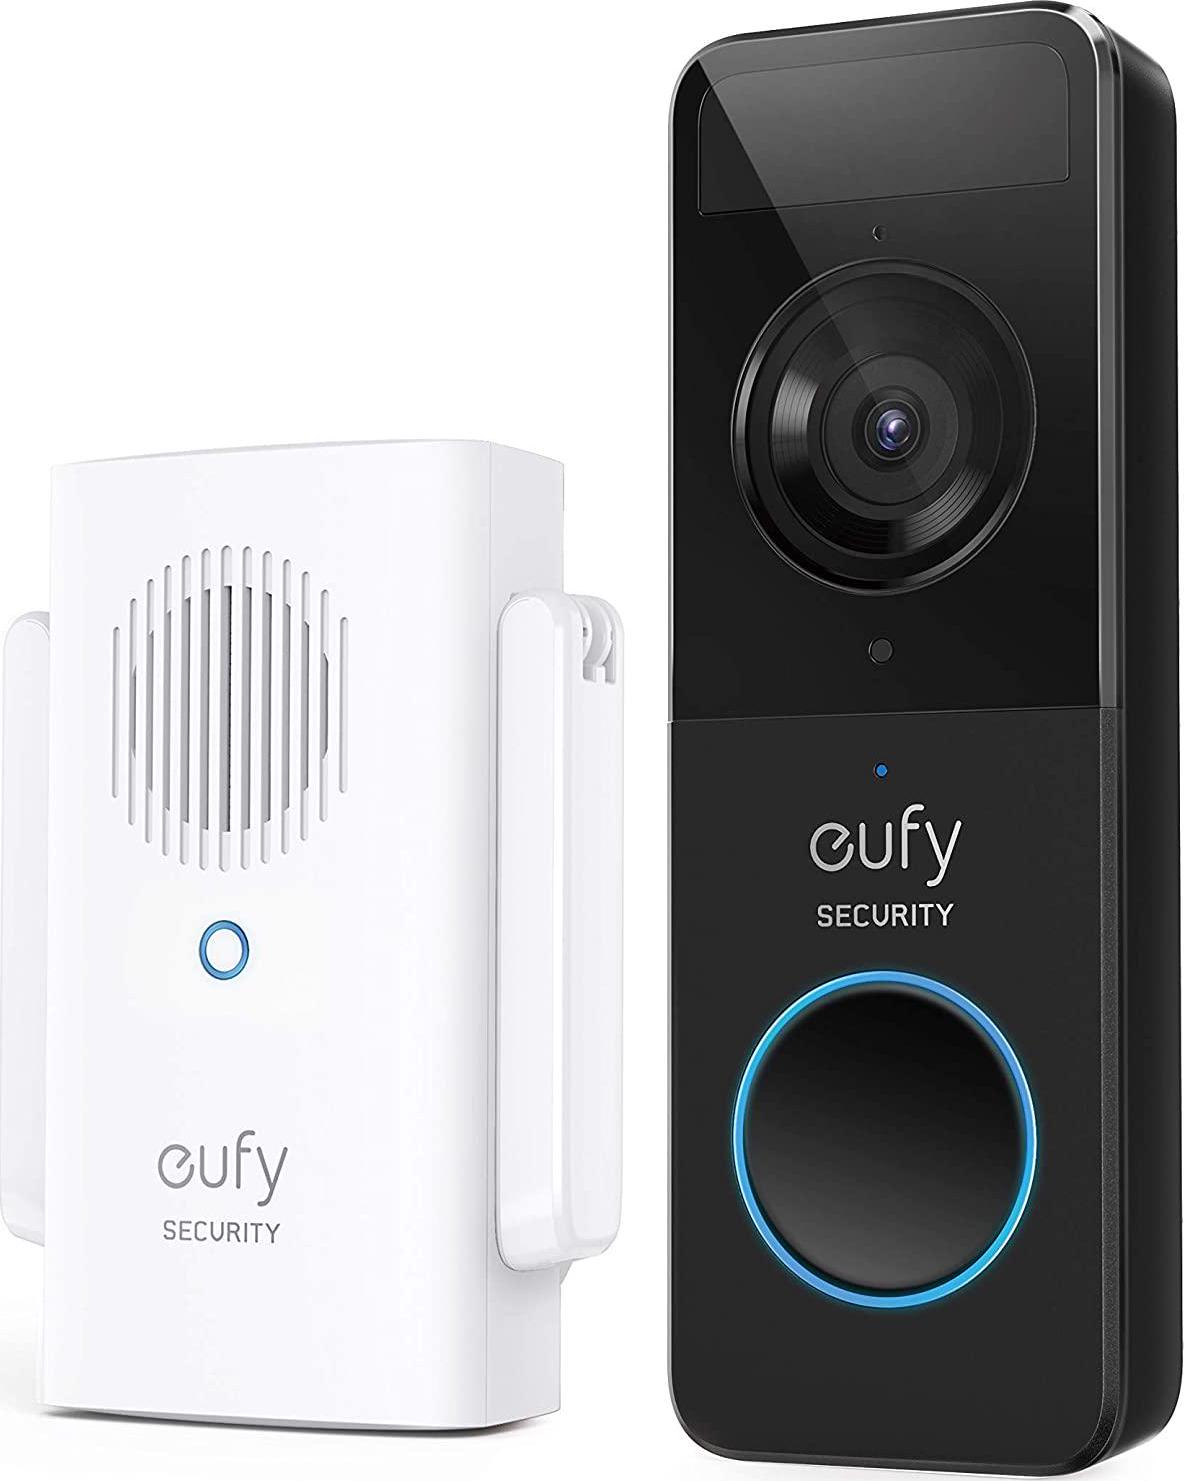 Eufy, Eufy E8220CW1 Security Slim 1080P Battery Doorbell with Homebase Mini Repeater